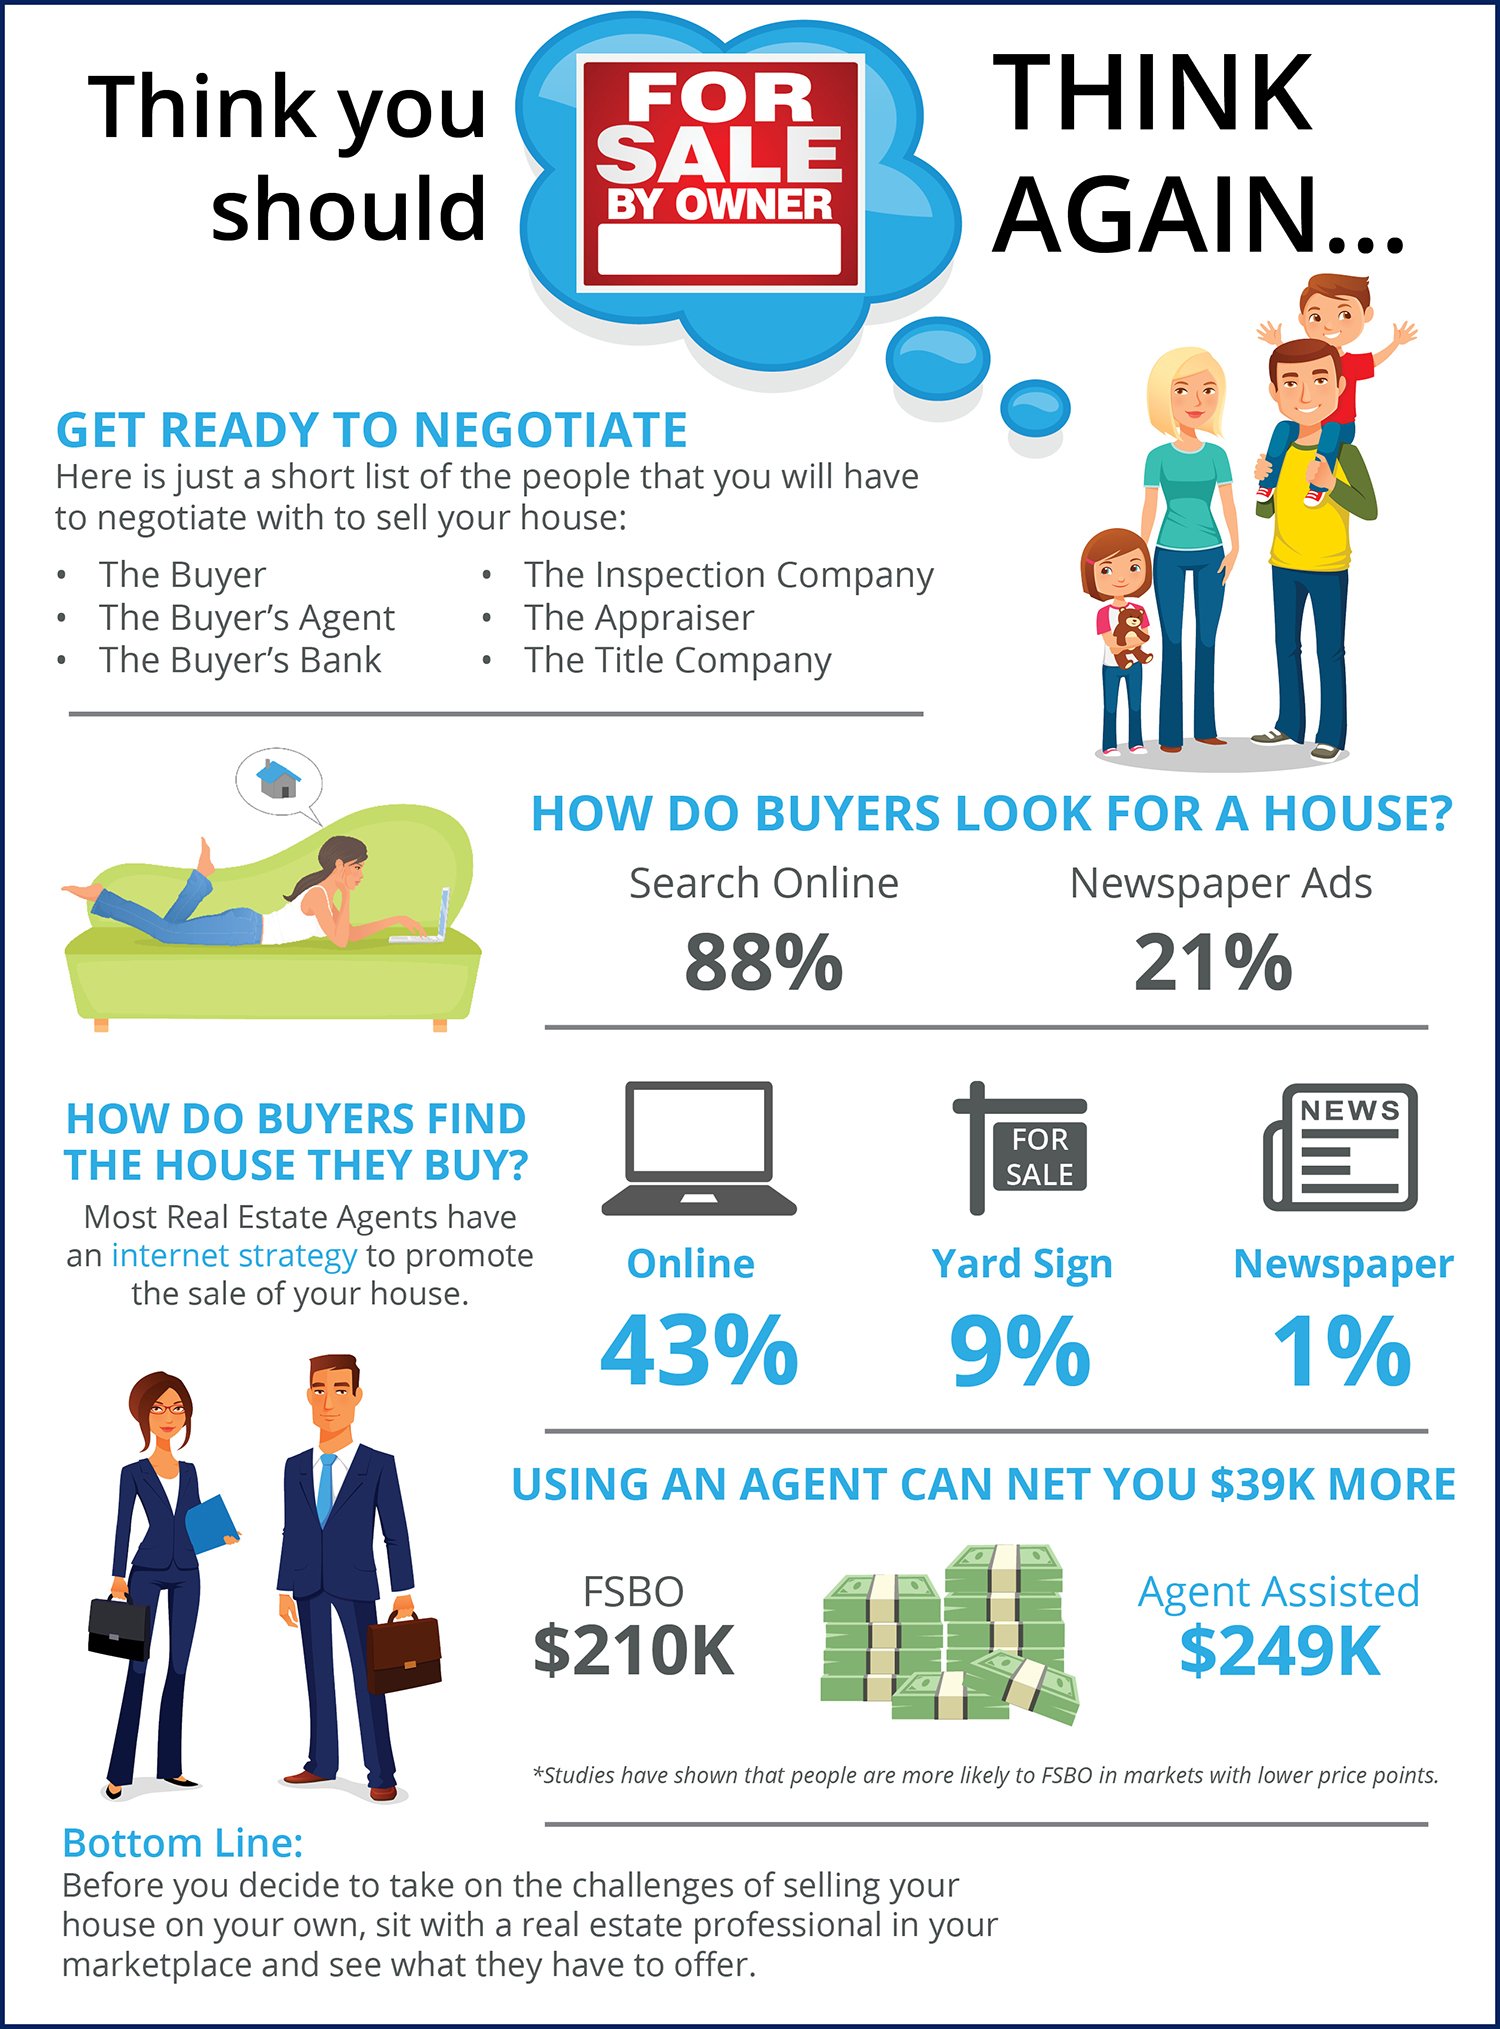 Thinking You Should FSBO? Think Again [fusion_builder_container hundred_percent=